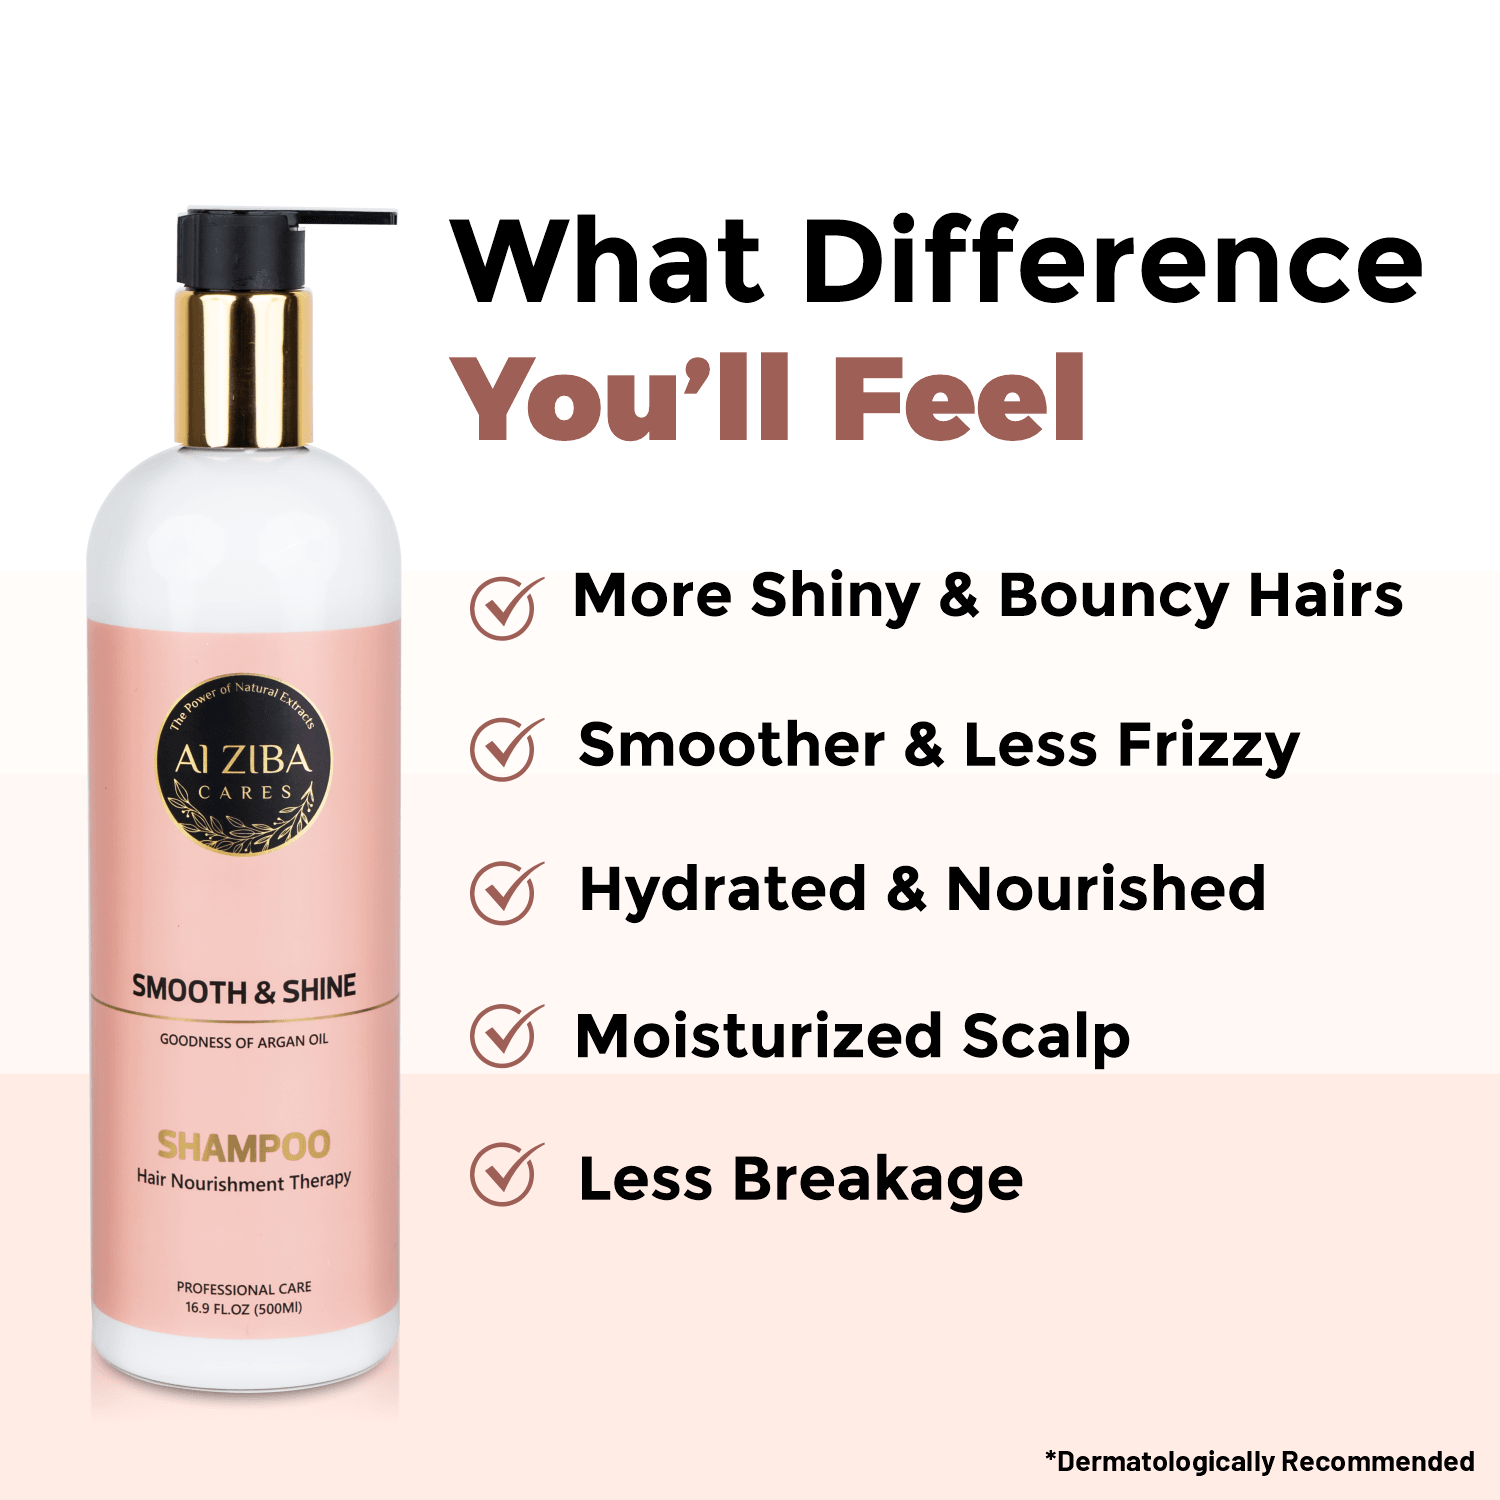 ALZIBA CARES Smooth & Shine Shampoo | 10x Time More Smoother Hair with Natural Argan Oil, Glycerine and Vitamin B5 | Non-Toxic, Vegan, Gluten, Sulphate and Paraben Free | For Women & Men | 500ml - ALZIBA CARES